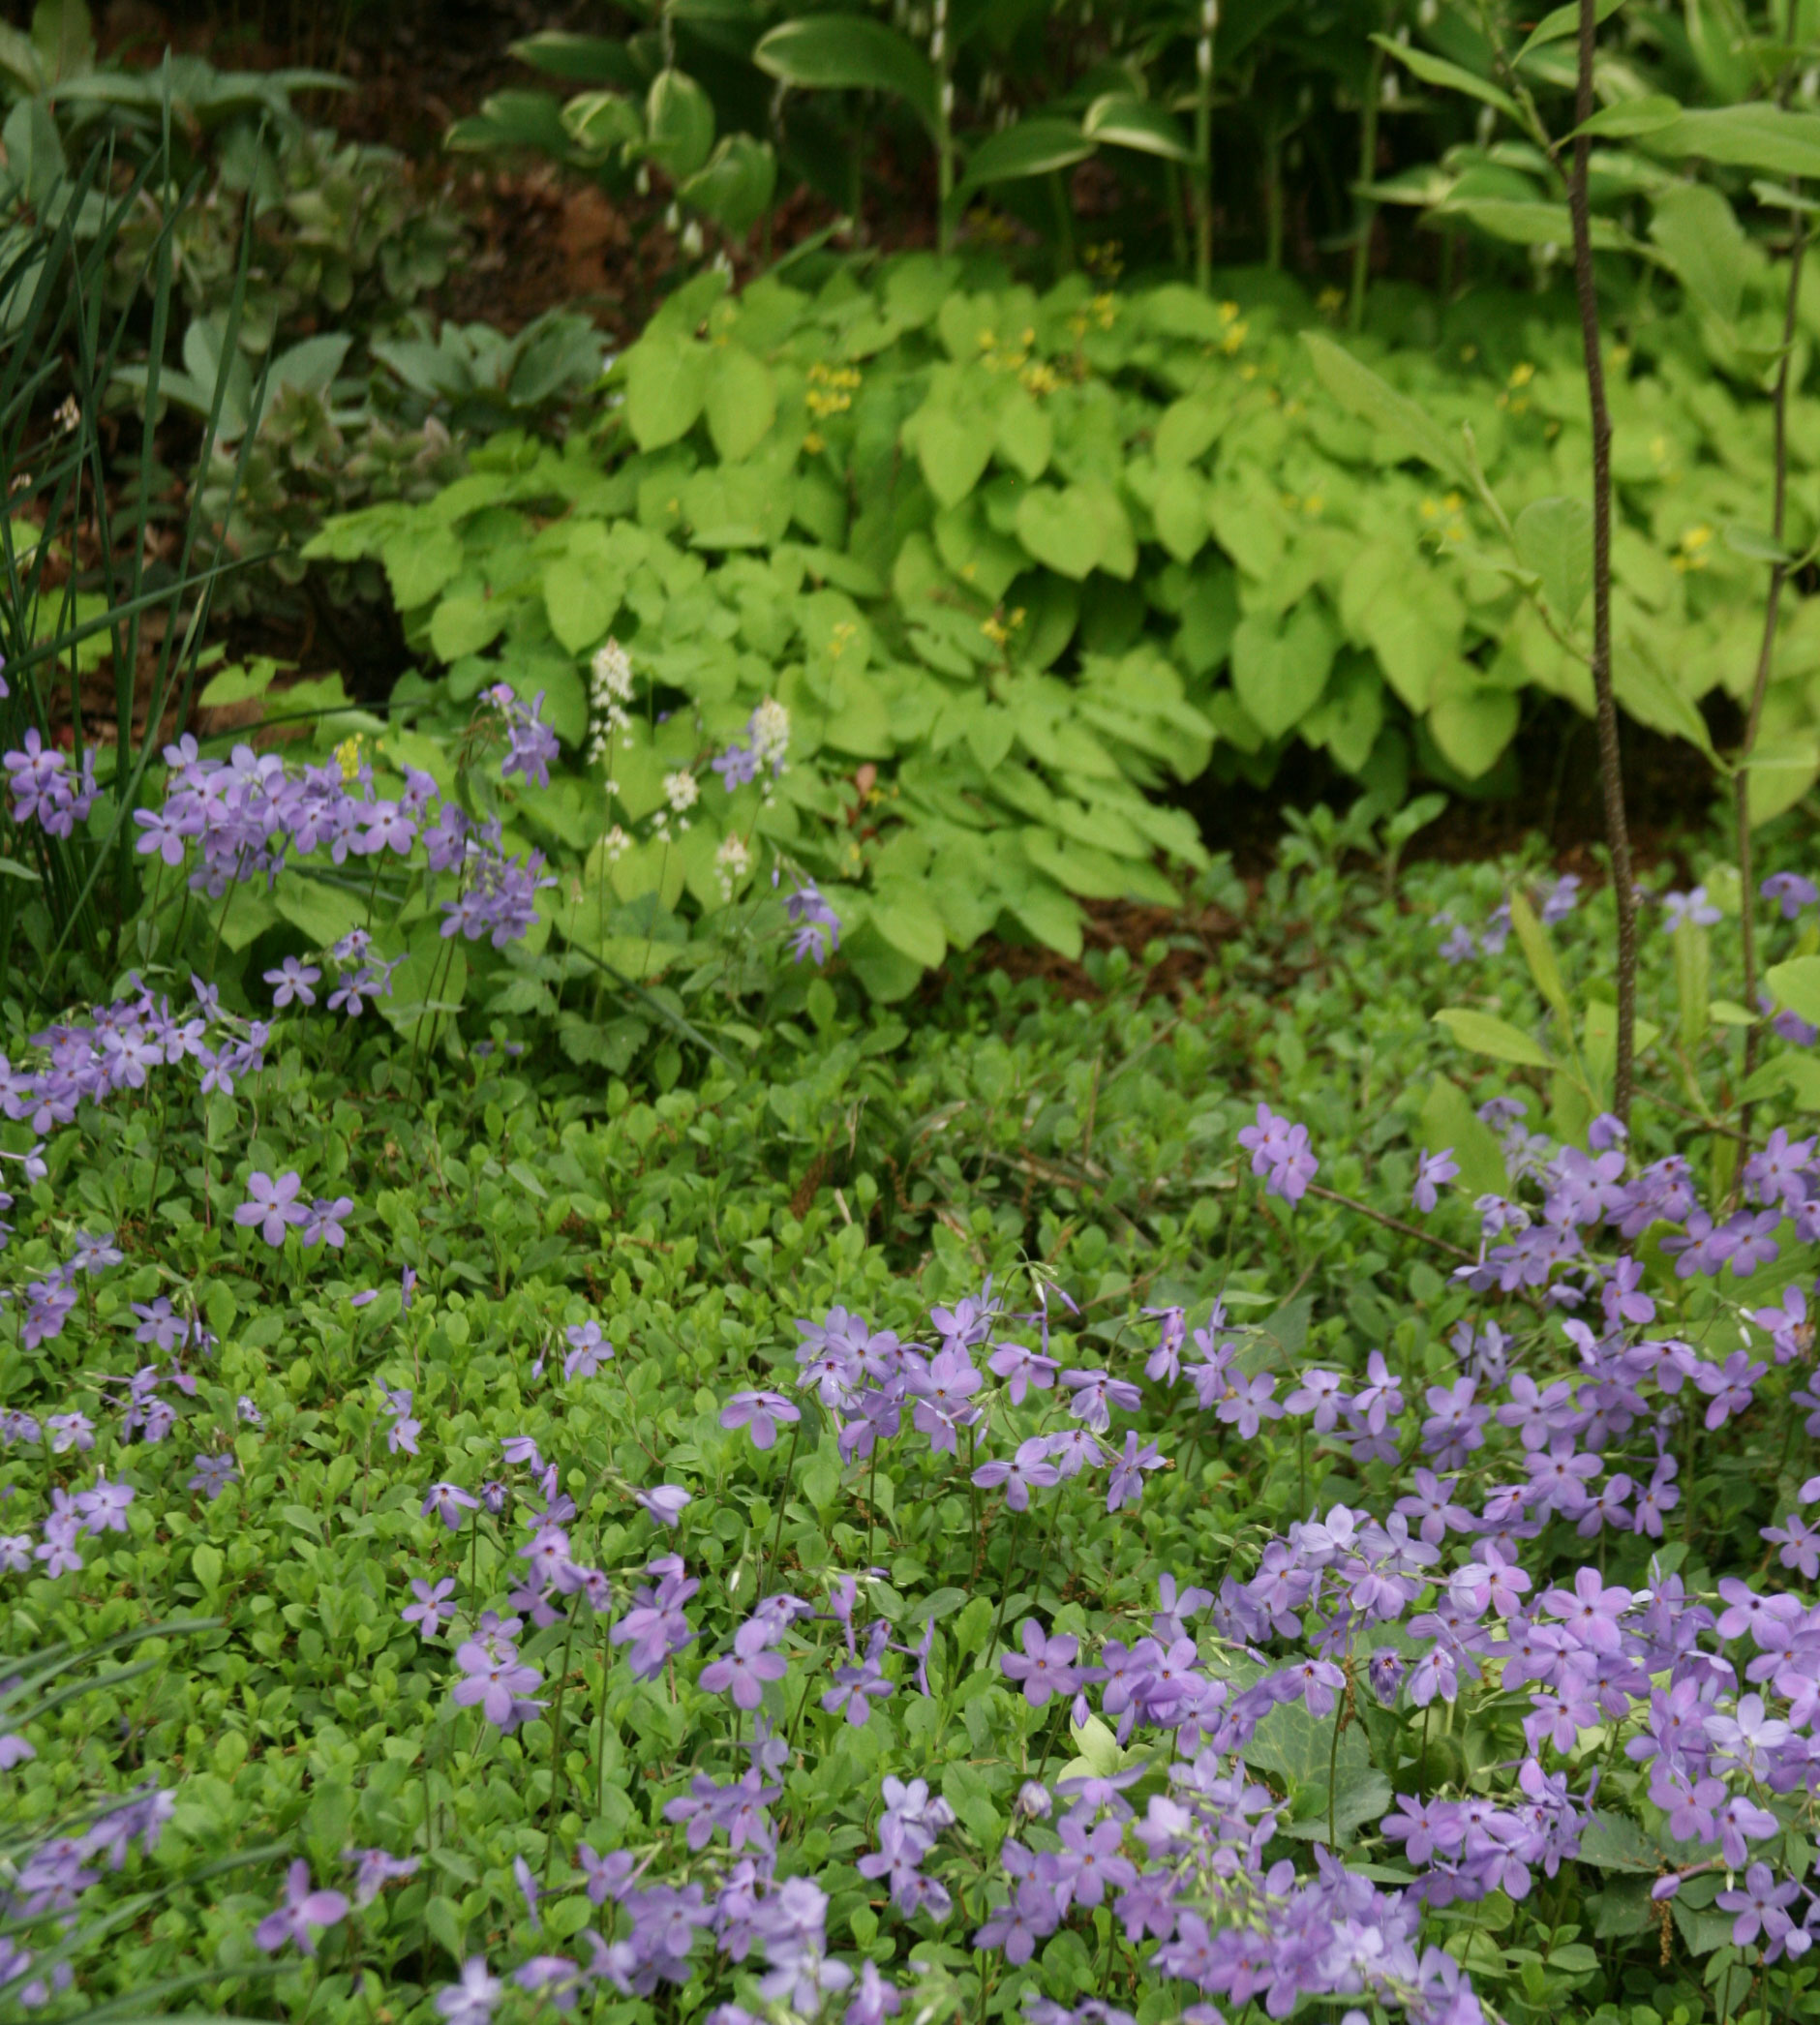 Treadwells, Stepables and Perennial Ground Covers in General